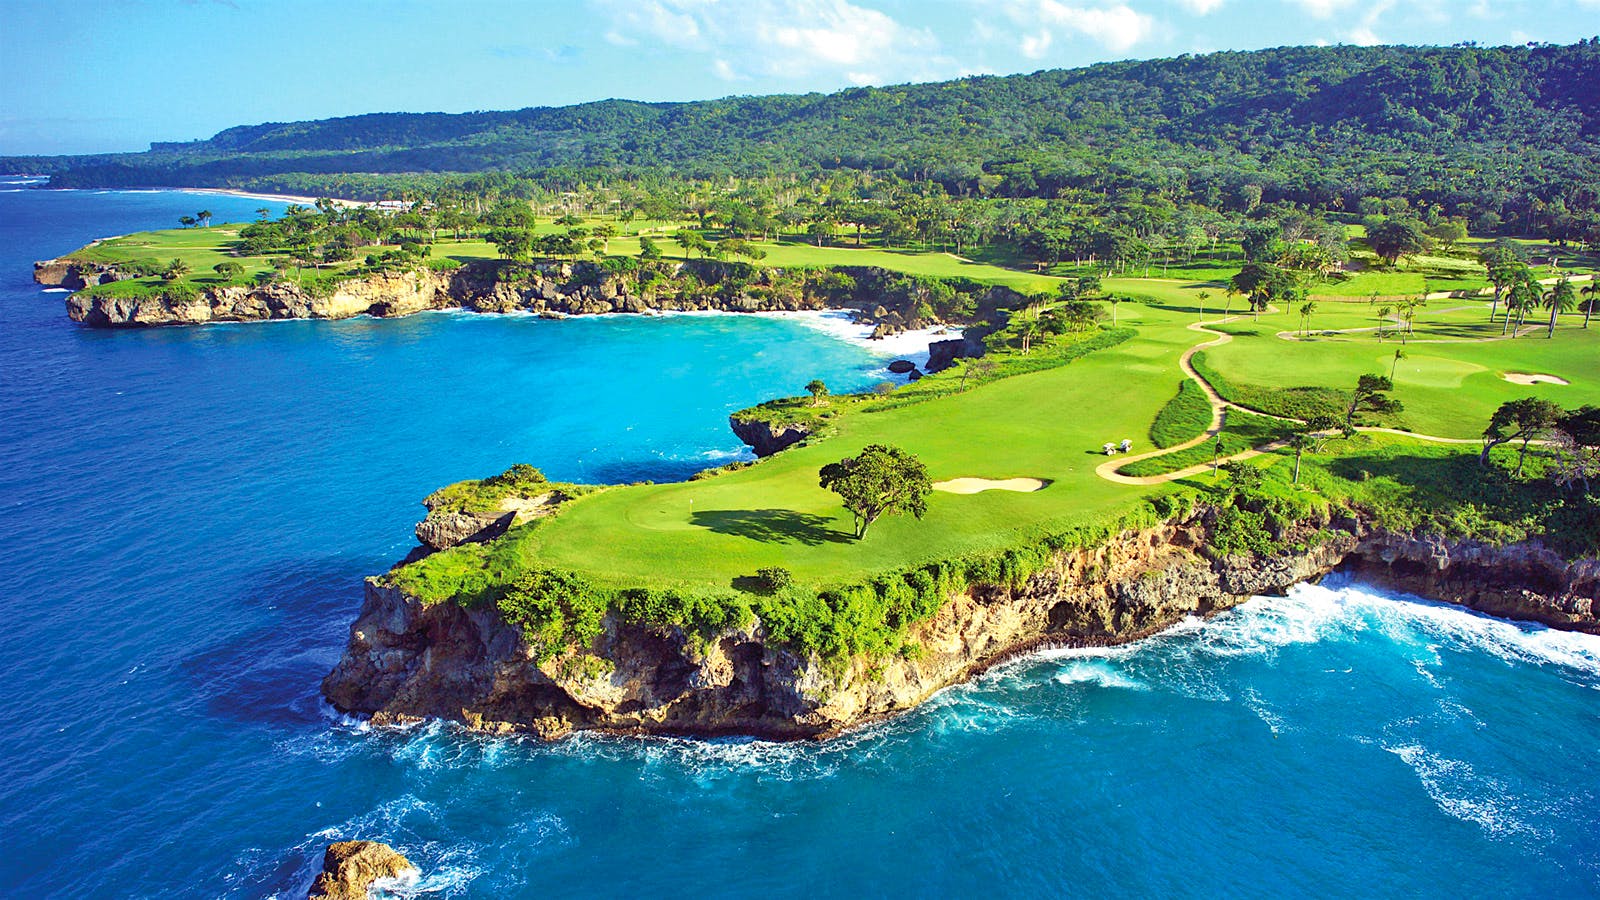 The Dominican Republic has long been the king of Caribbean golf, but its hidden gem is the Playa Grande Golf Course, a stunning Robert Trent Jones Sr. clifftop design on the country’s less-visited north shore.